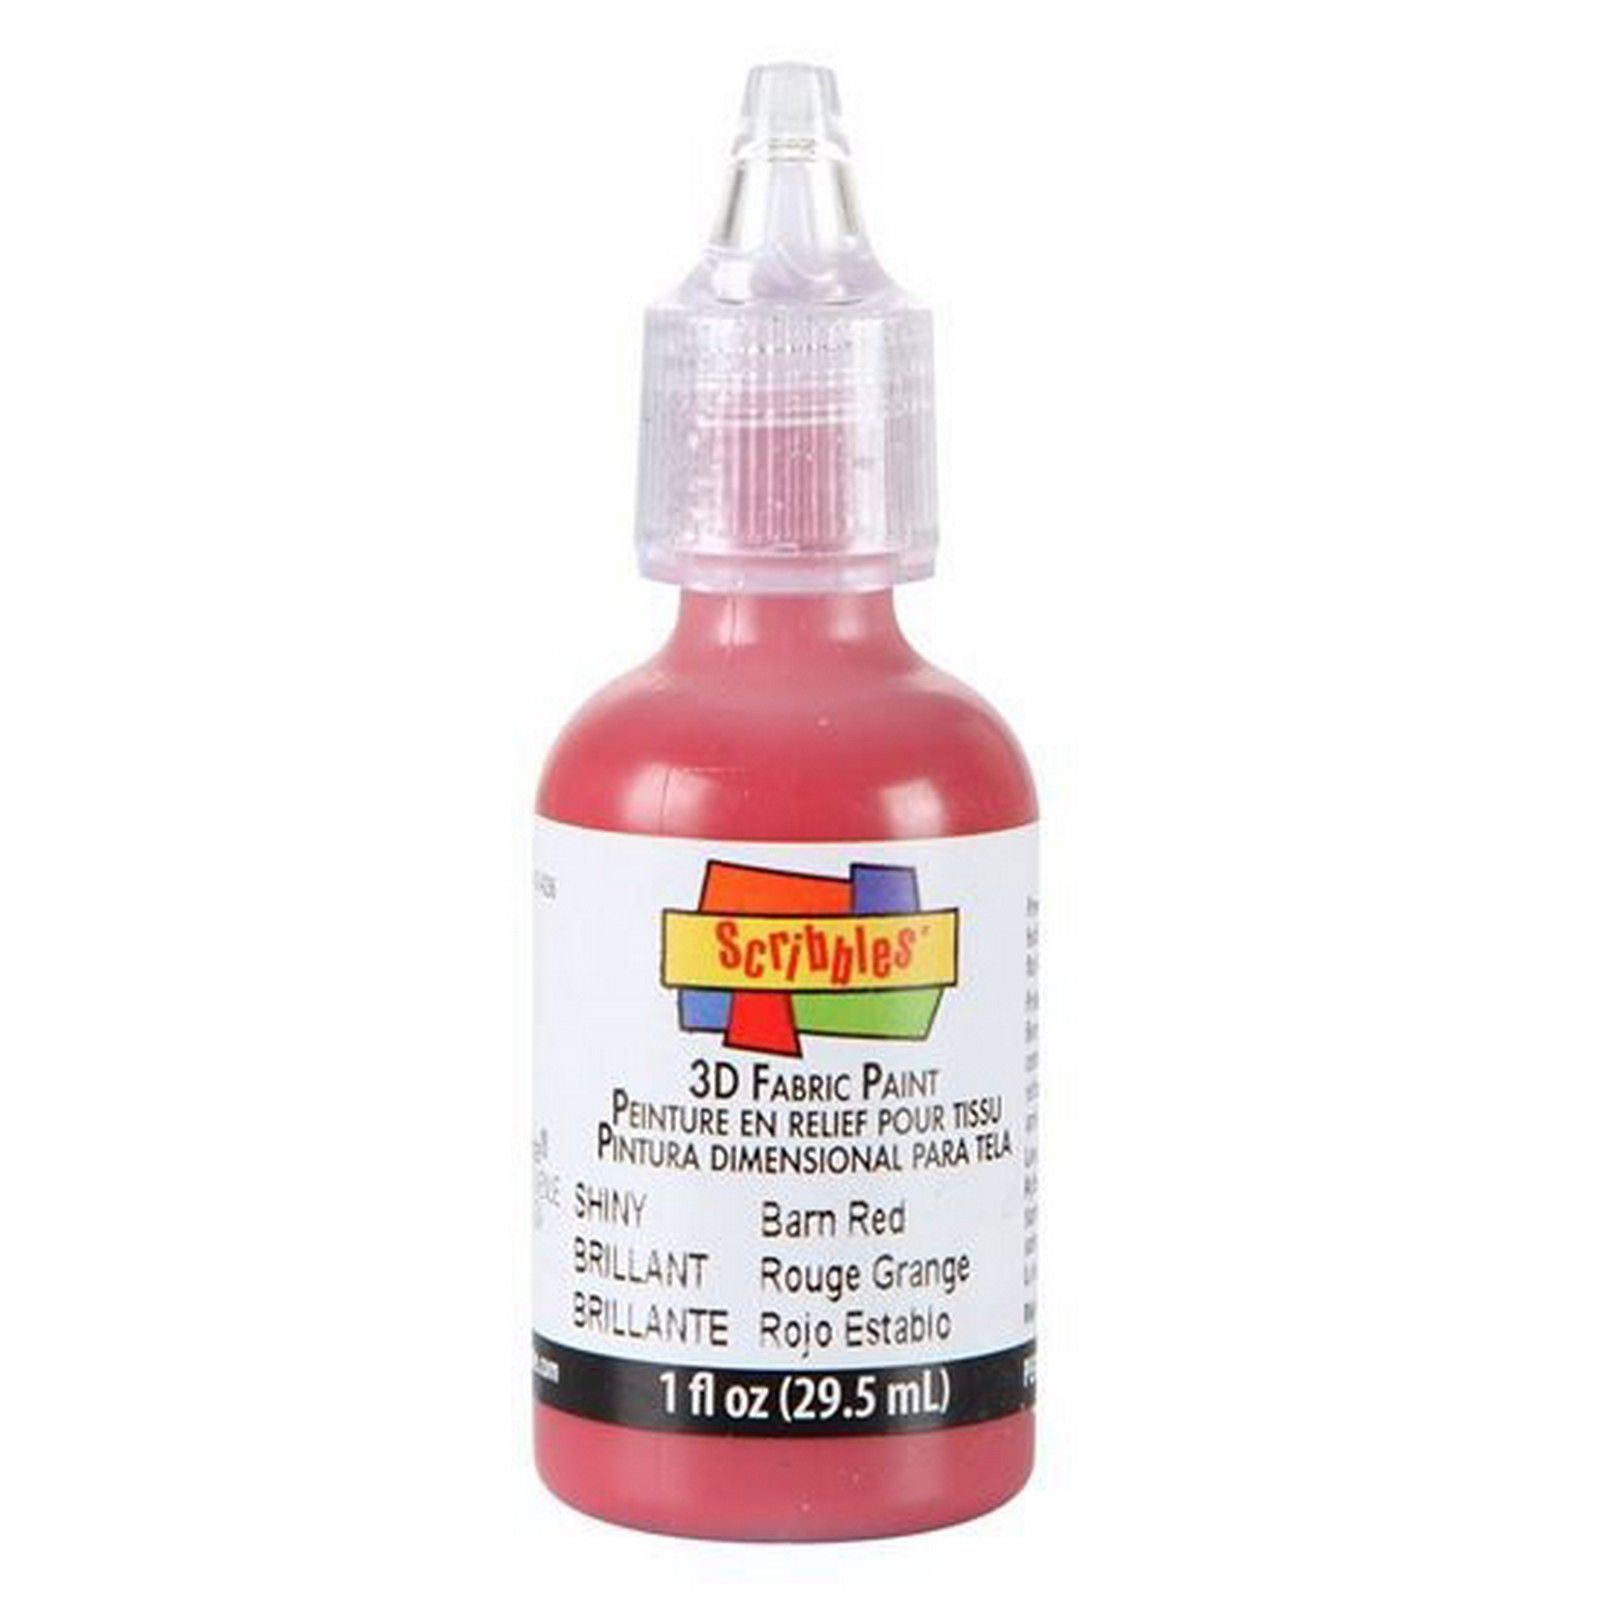 Scribbles • 3D Fabric Paint Shiny 29.5ml Barn Red